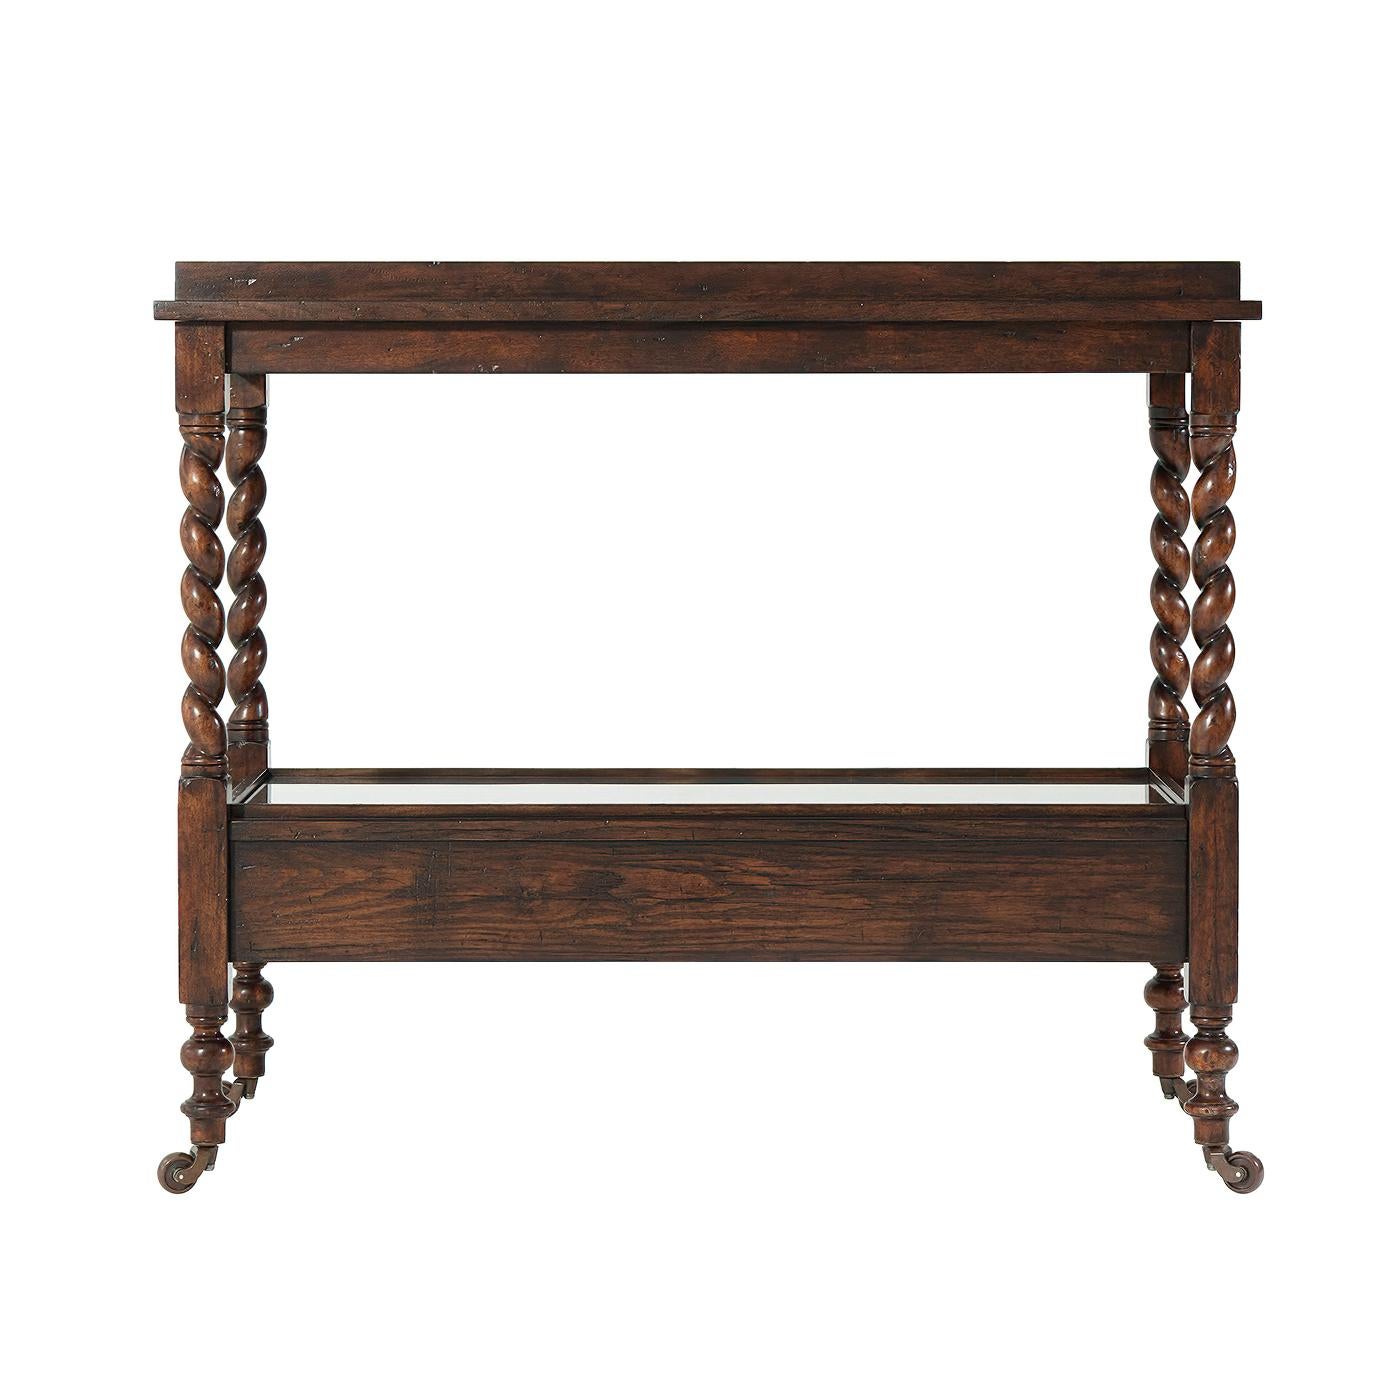 Rustic English Antiqued Serving Table For Sale